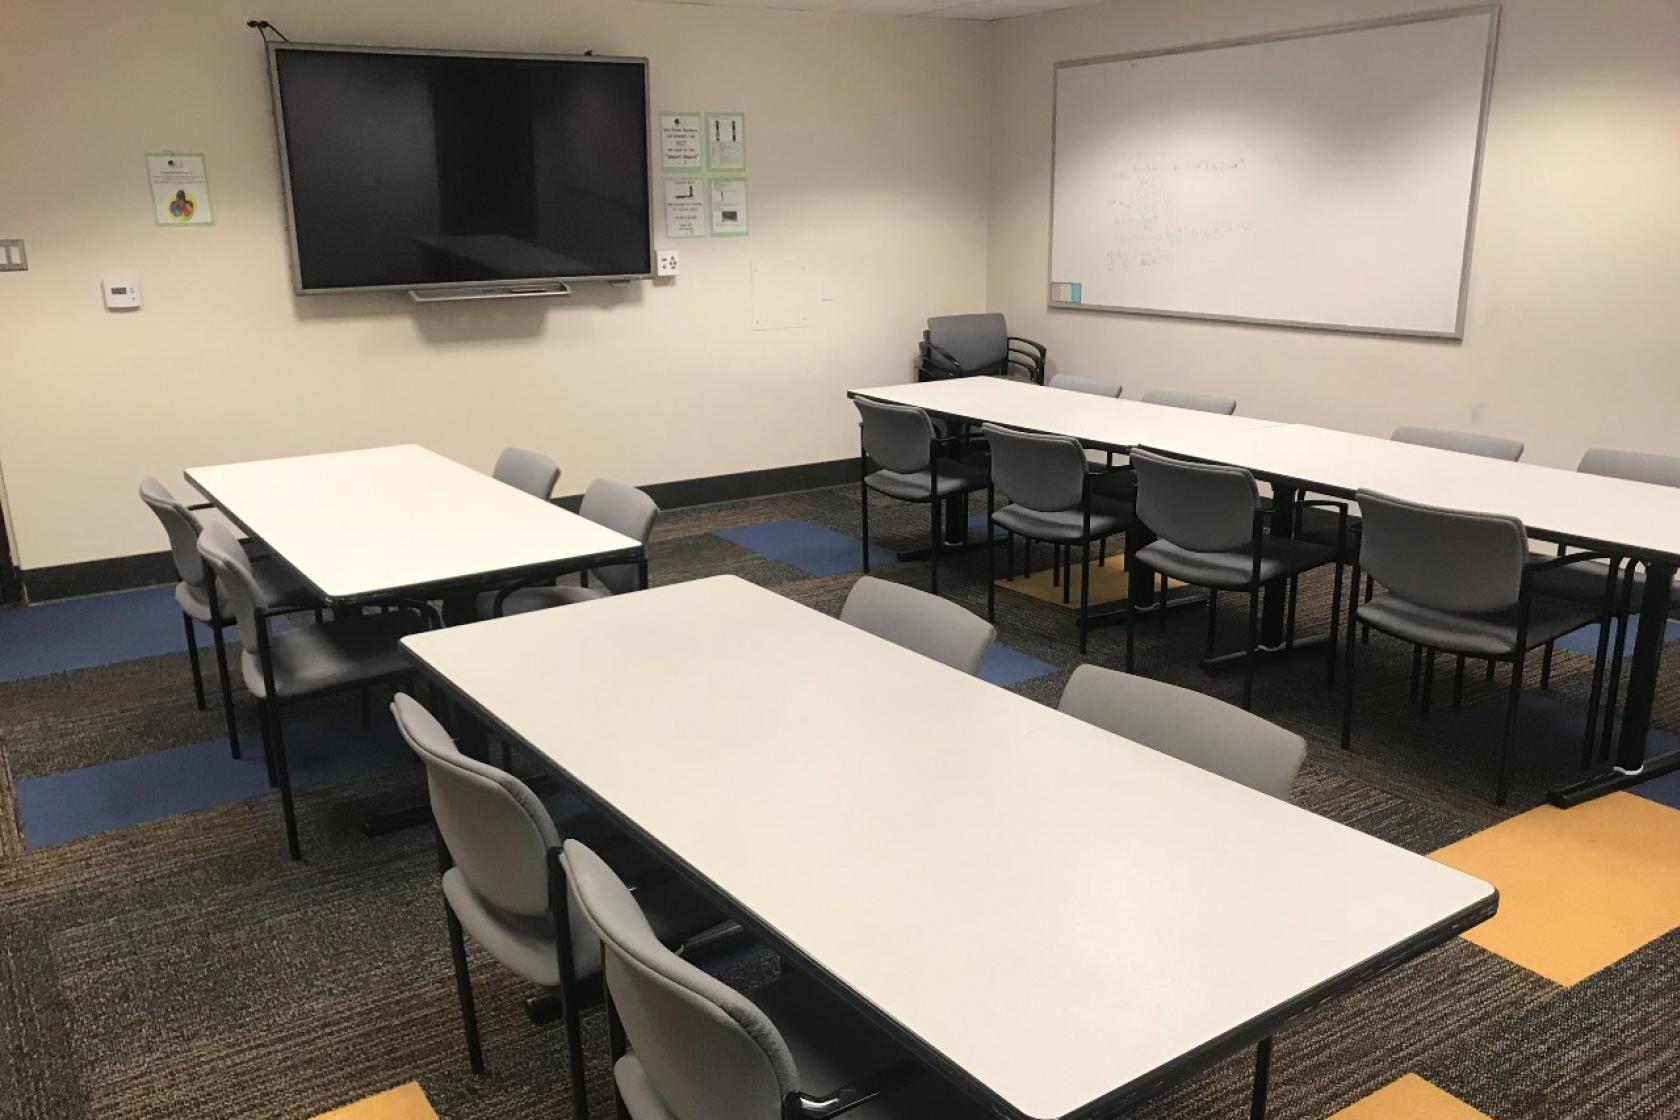 A classroom with a big screen on one wall and a white board on the other wall. There are four long classroom tables with four chairs each.